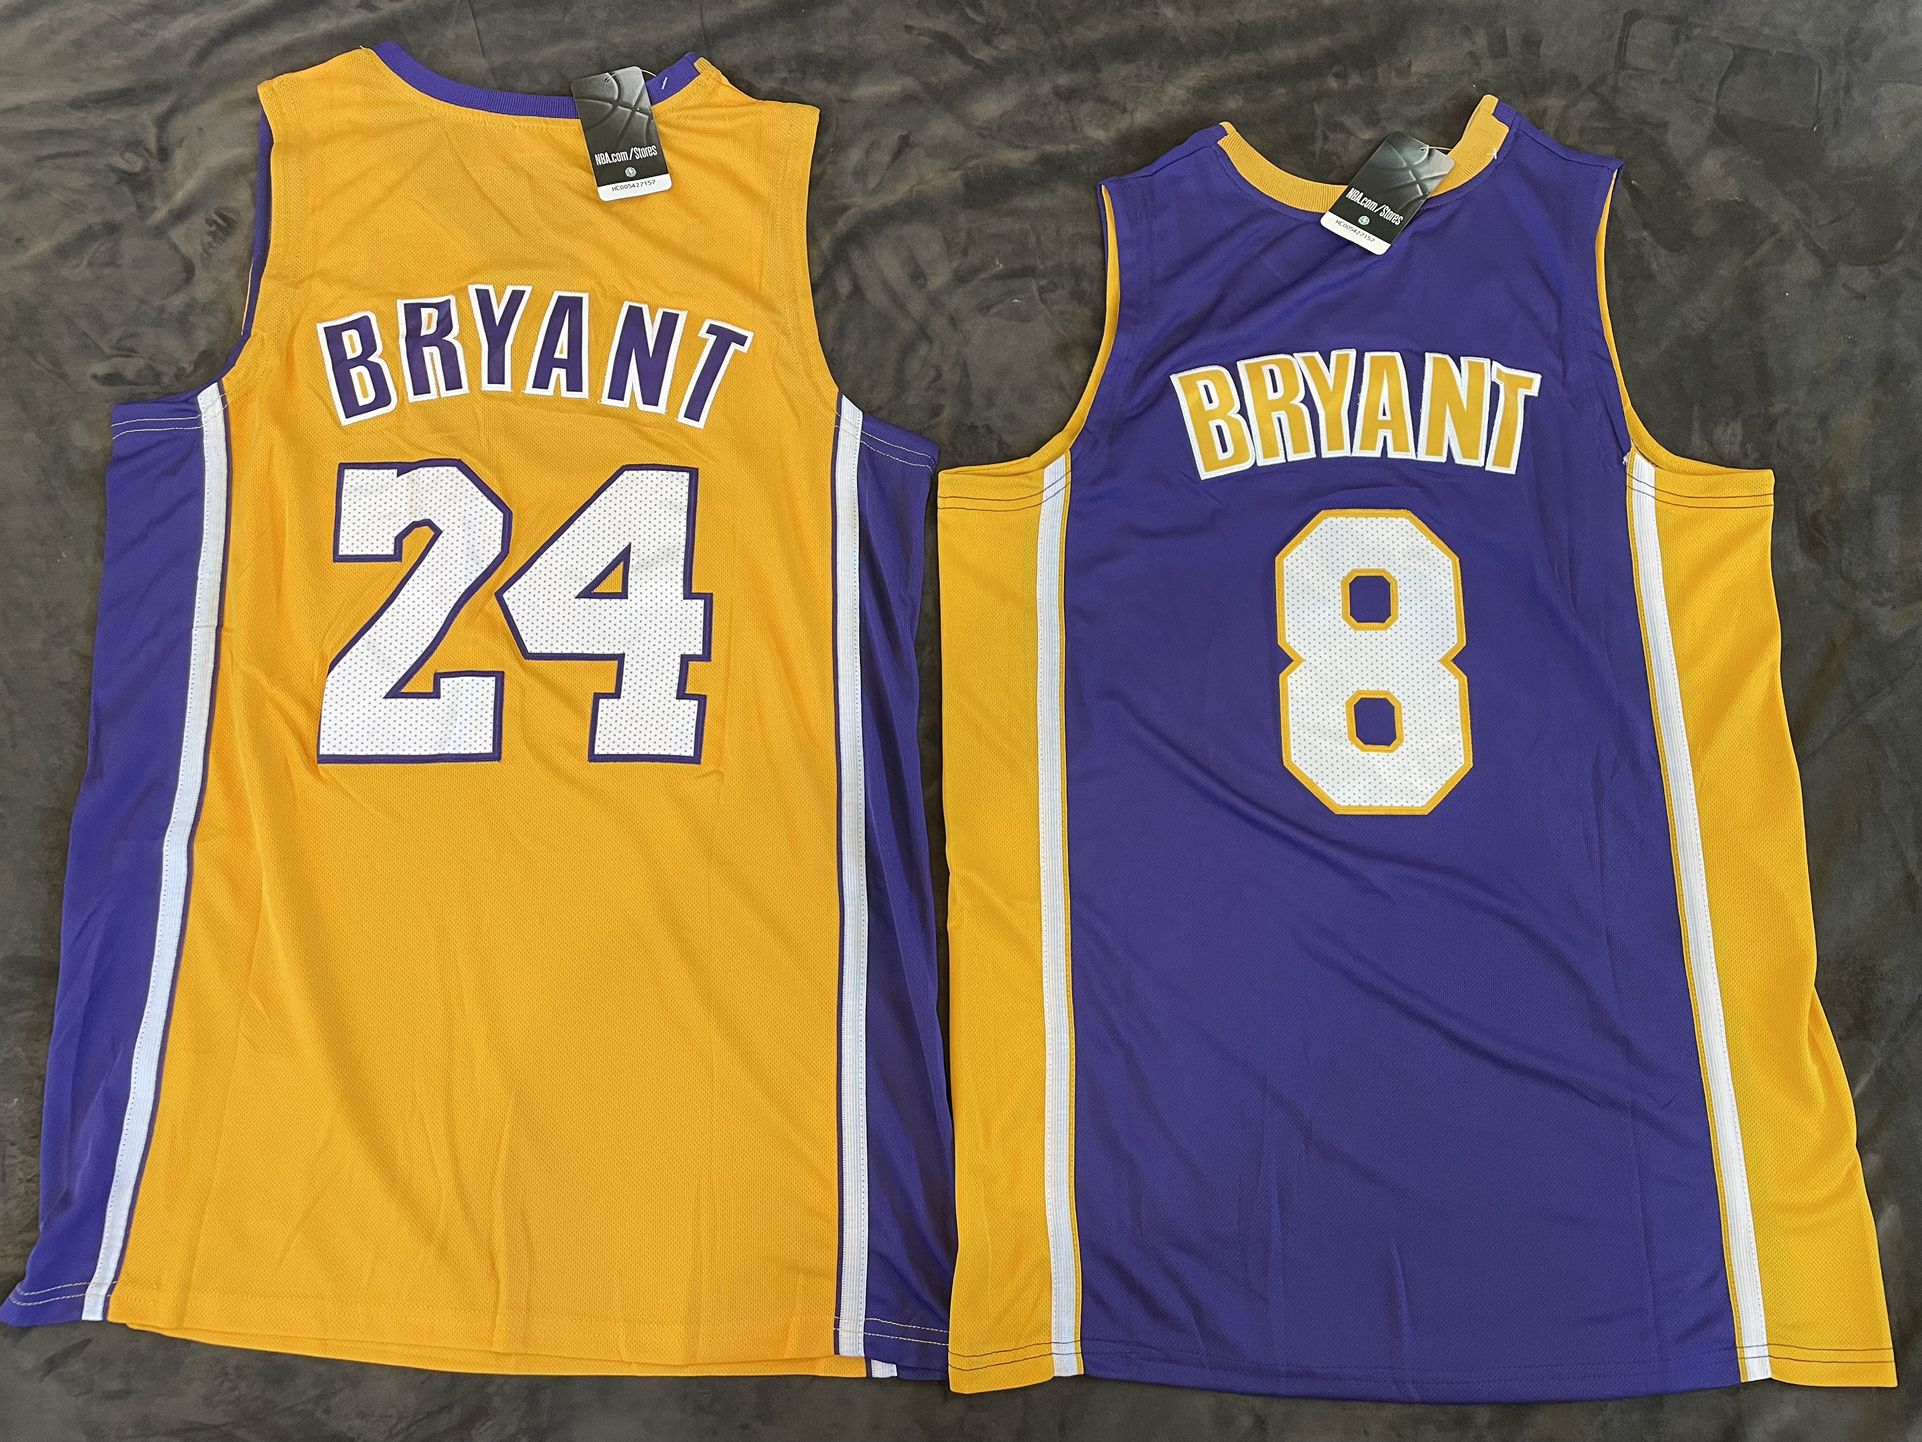 Kobe Bryant #8 Autographed and Framed Jersey for Sale in Hacienda Heights,  CA - OfferUp